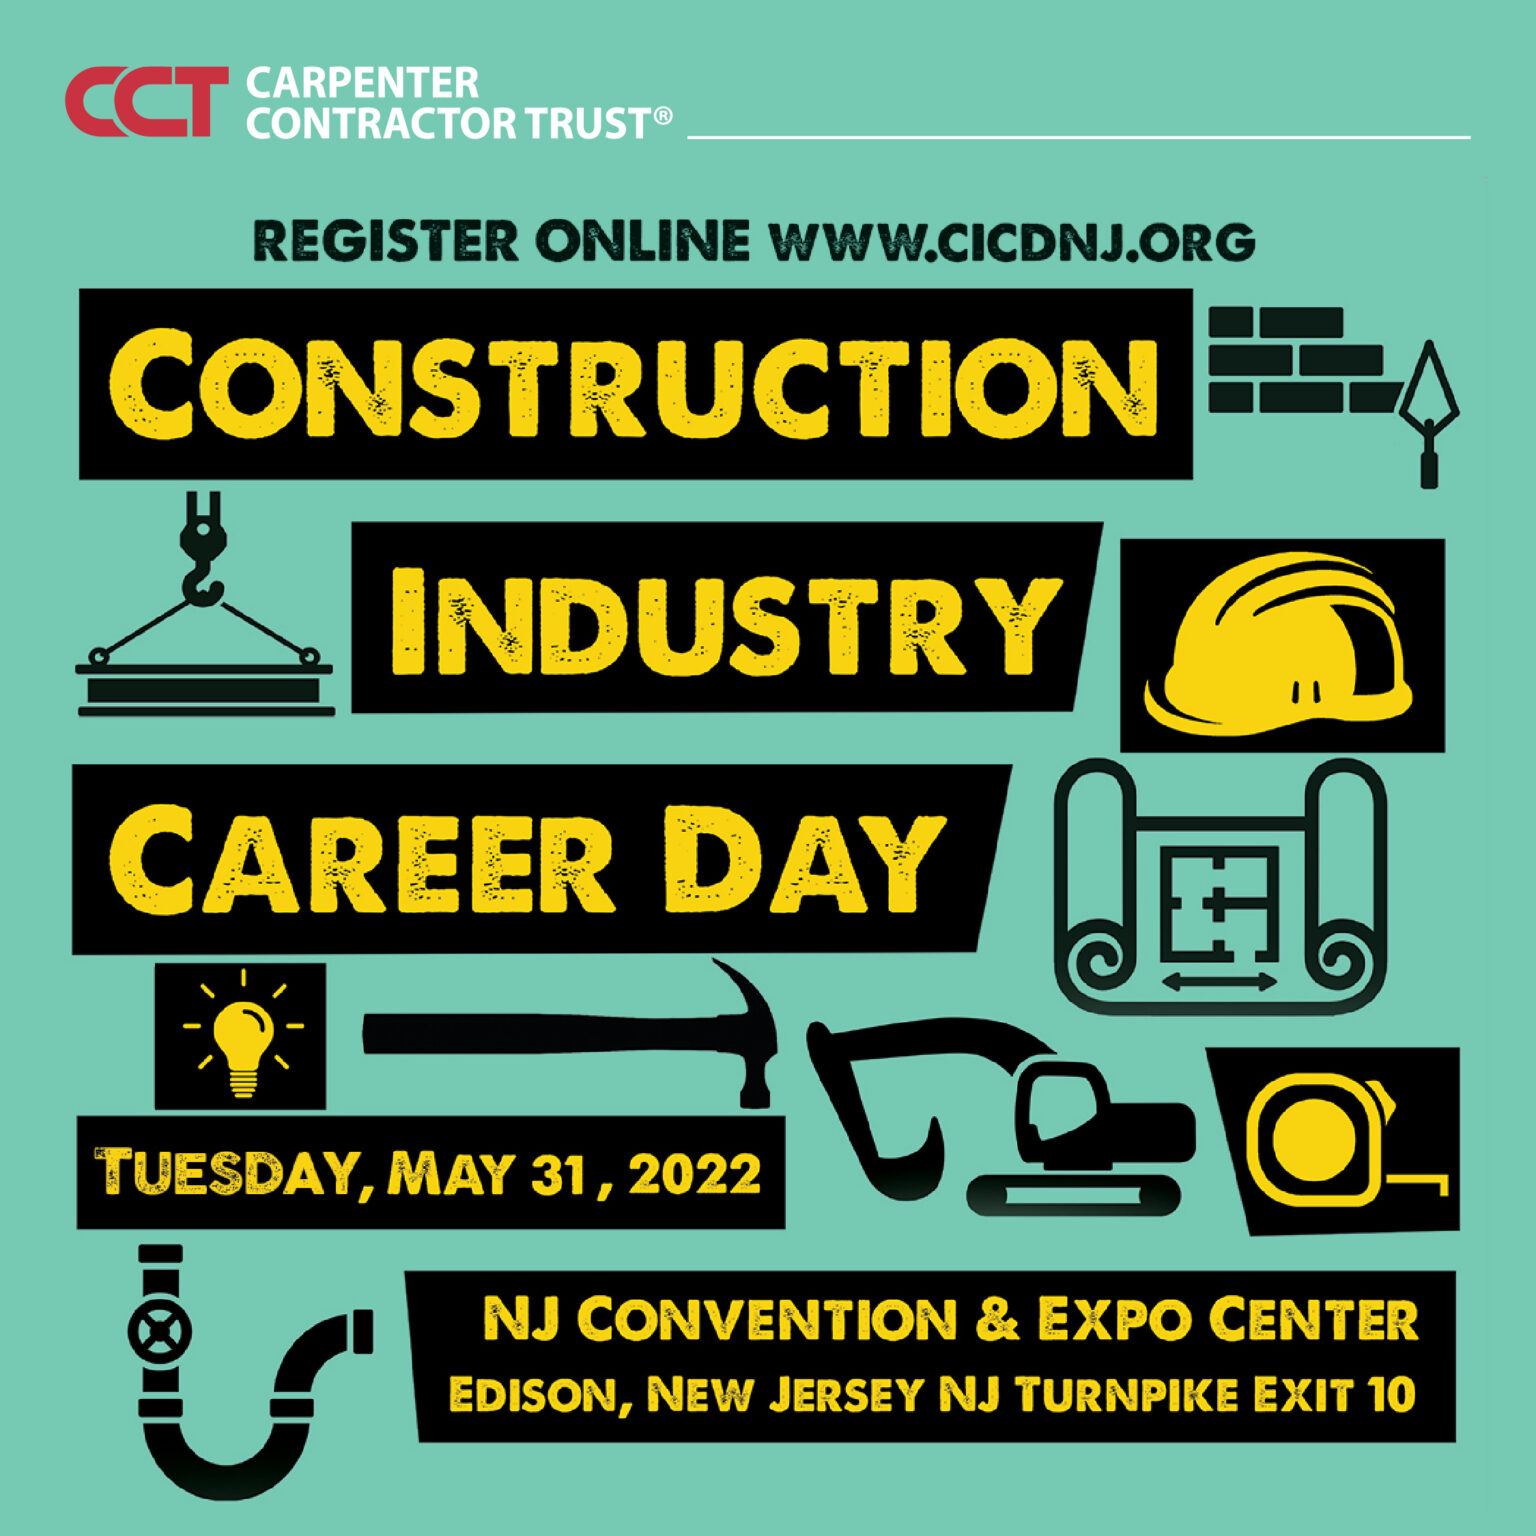 Construction Industry Career Day May 31, 2022 Carpenter Contractor Trust